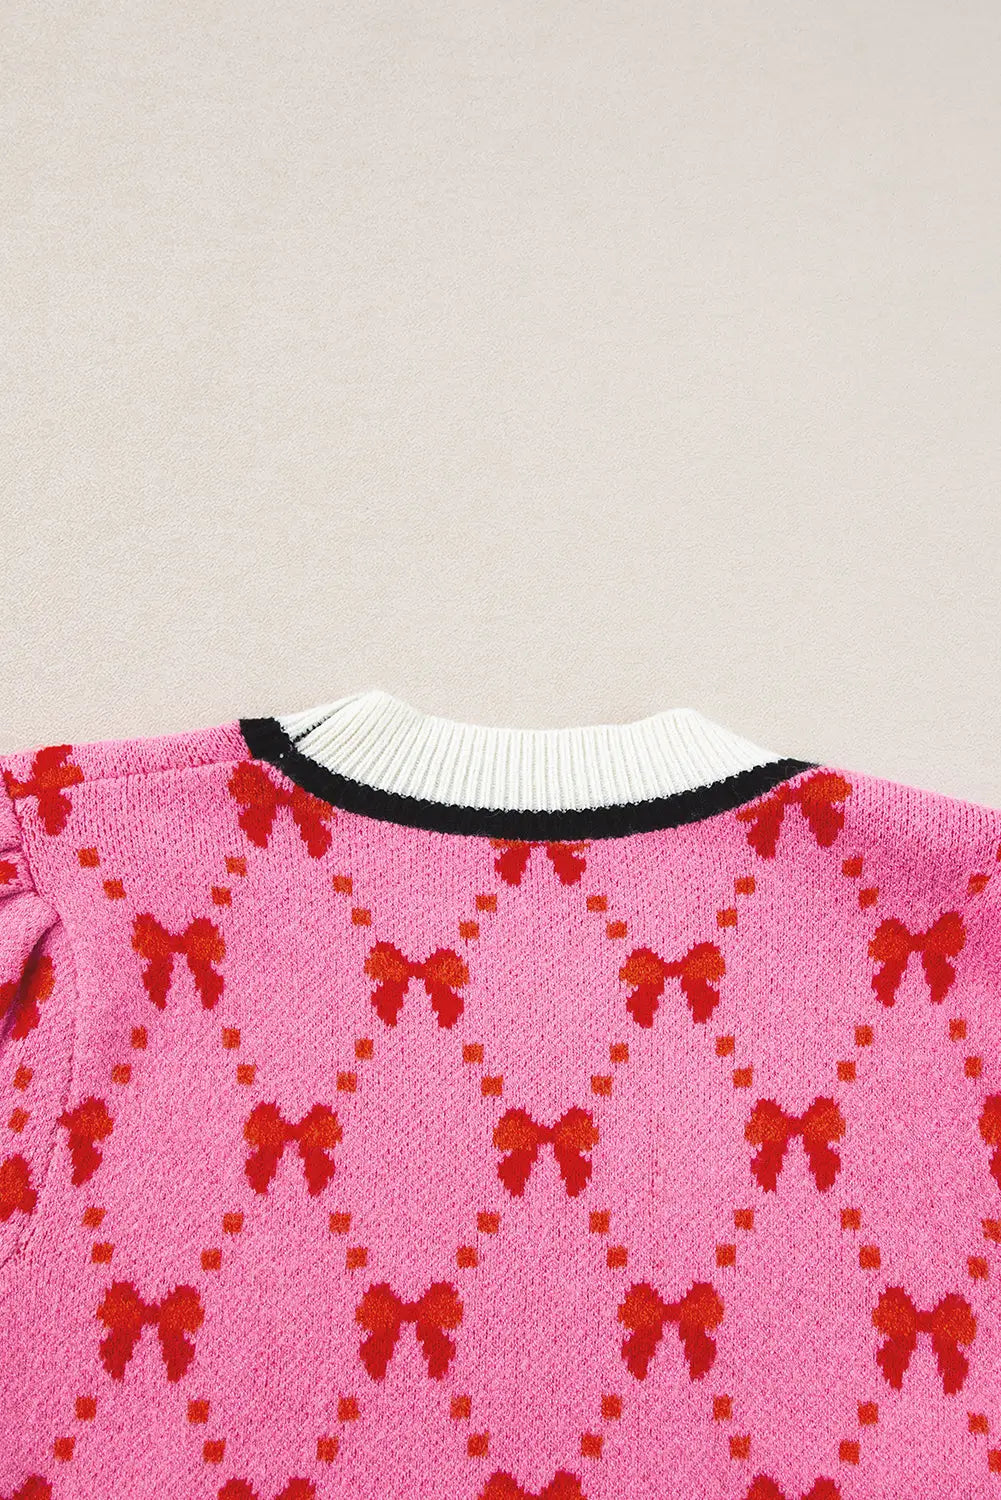 Pink bow short sleeve sweater top - tops/tops & tees